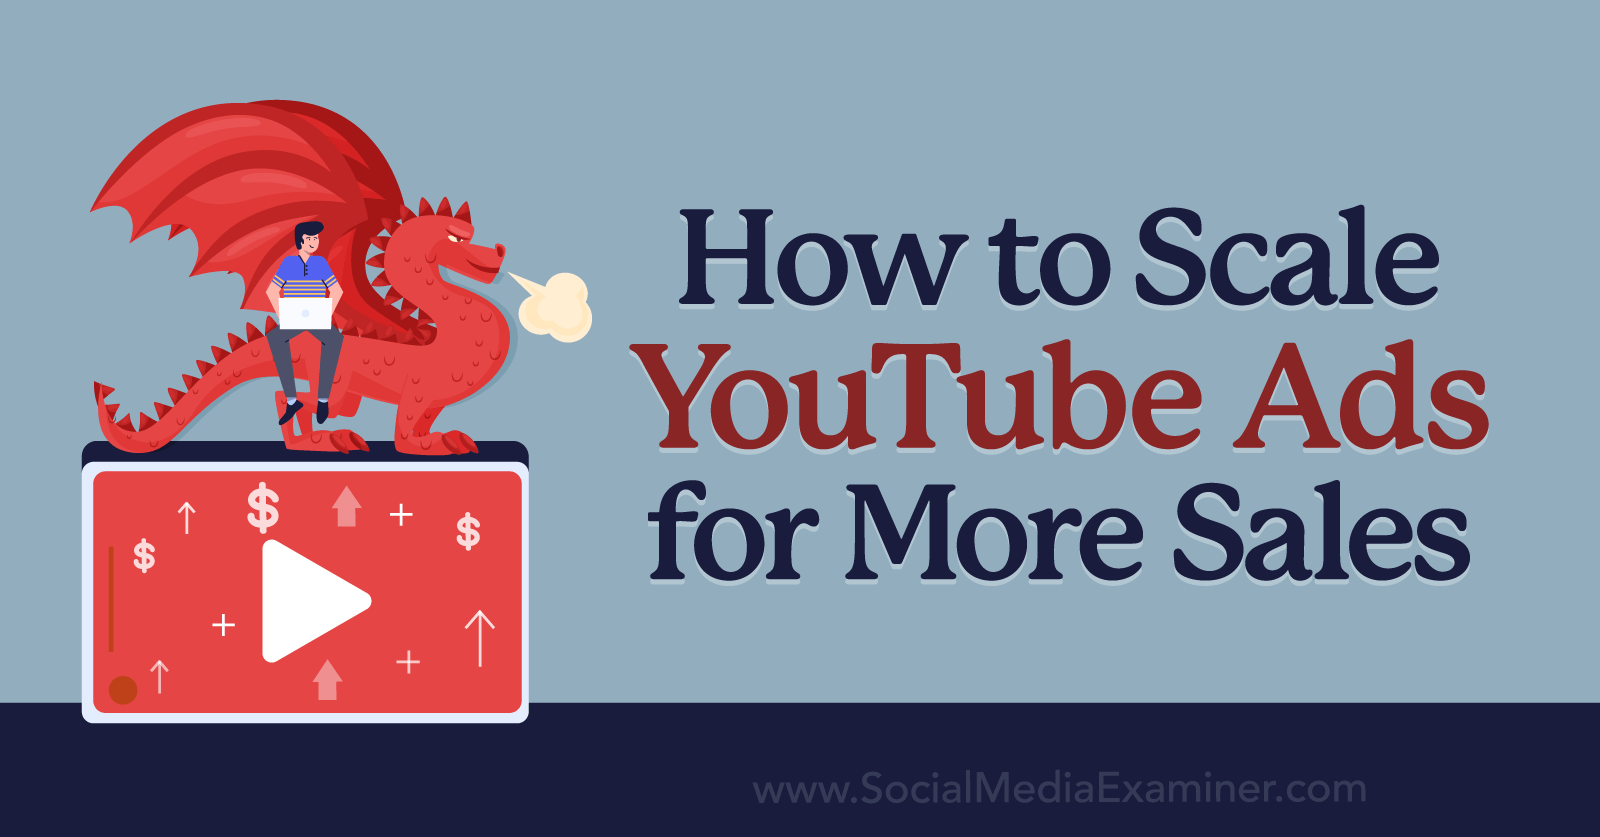 How to Scale YouTube Ads for More Sales-Social Media Examiner